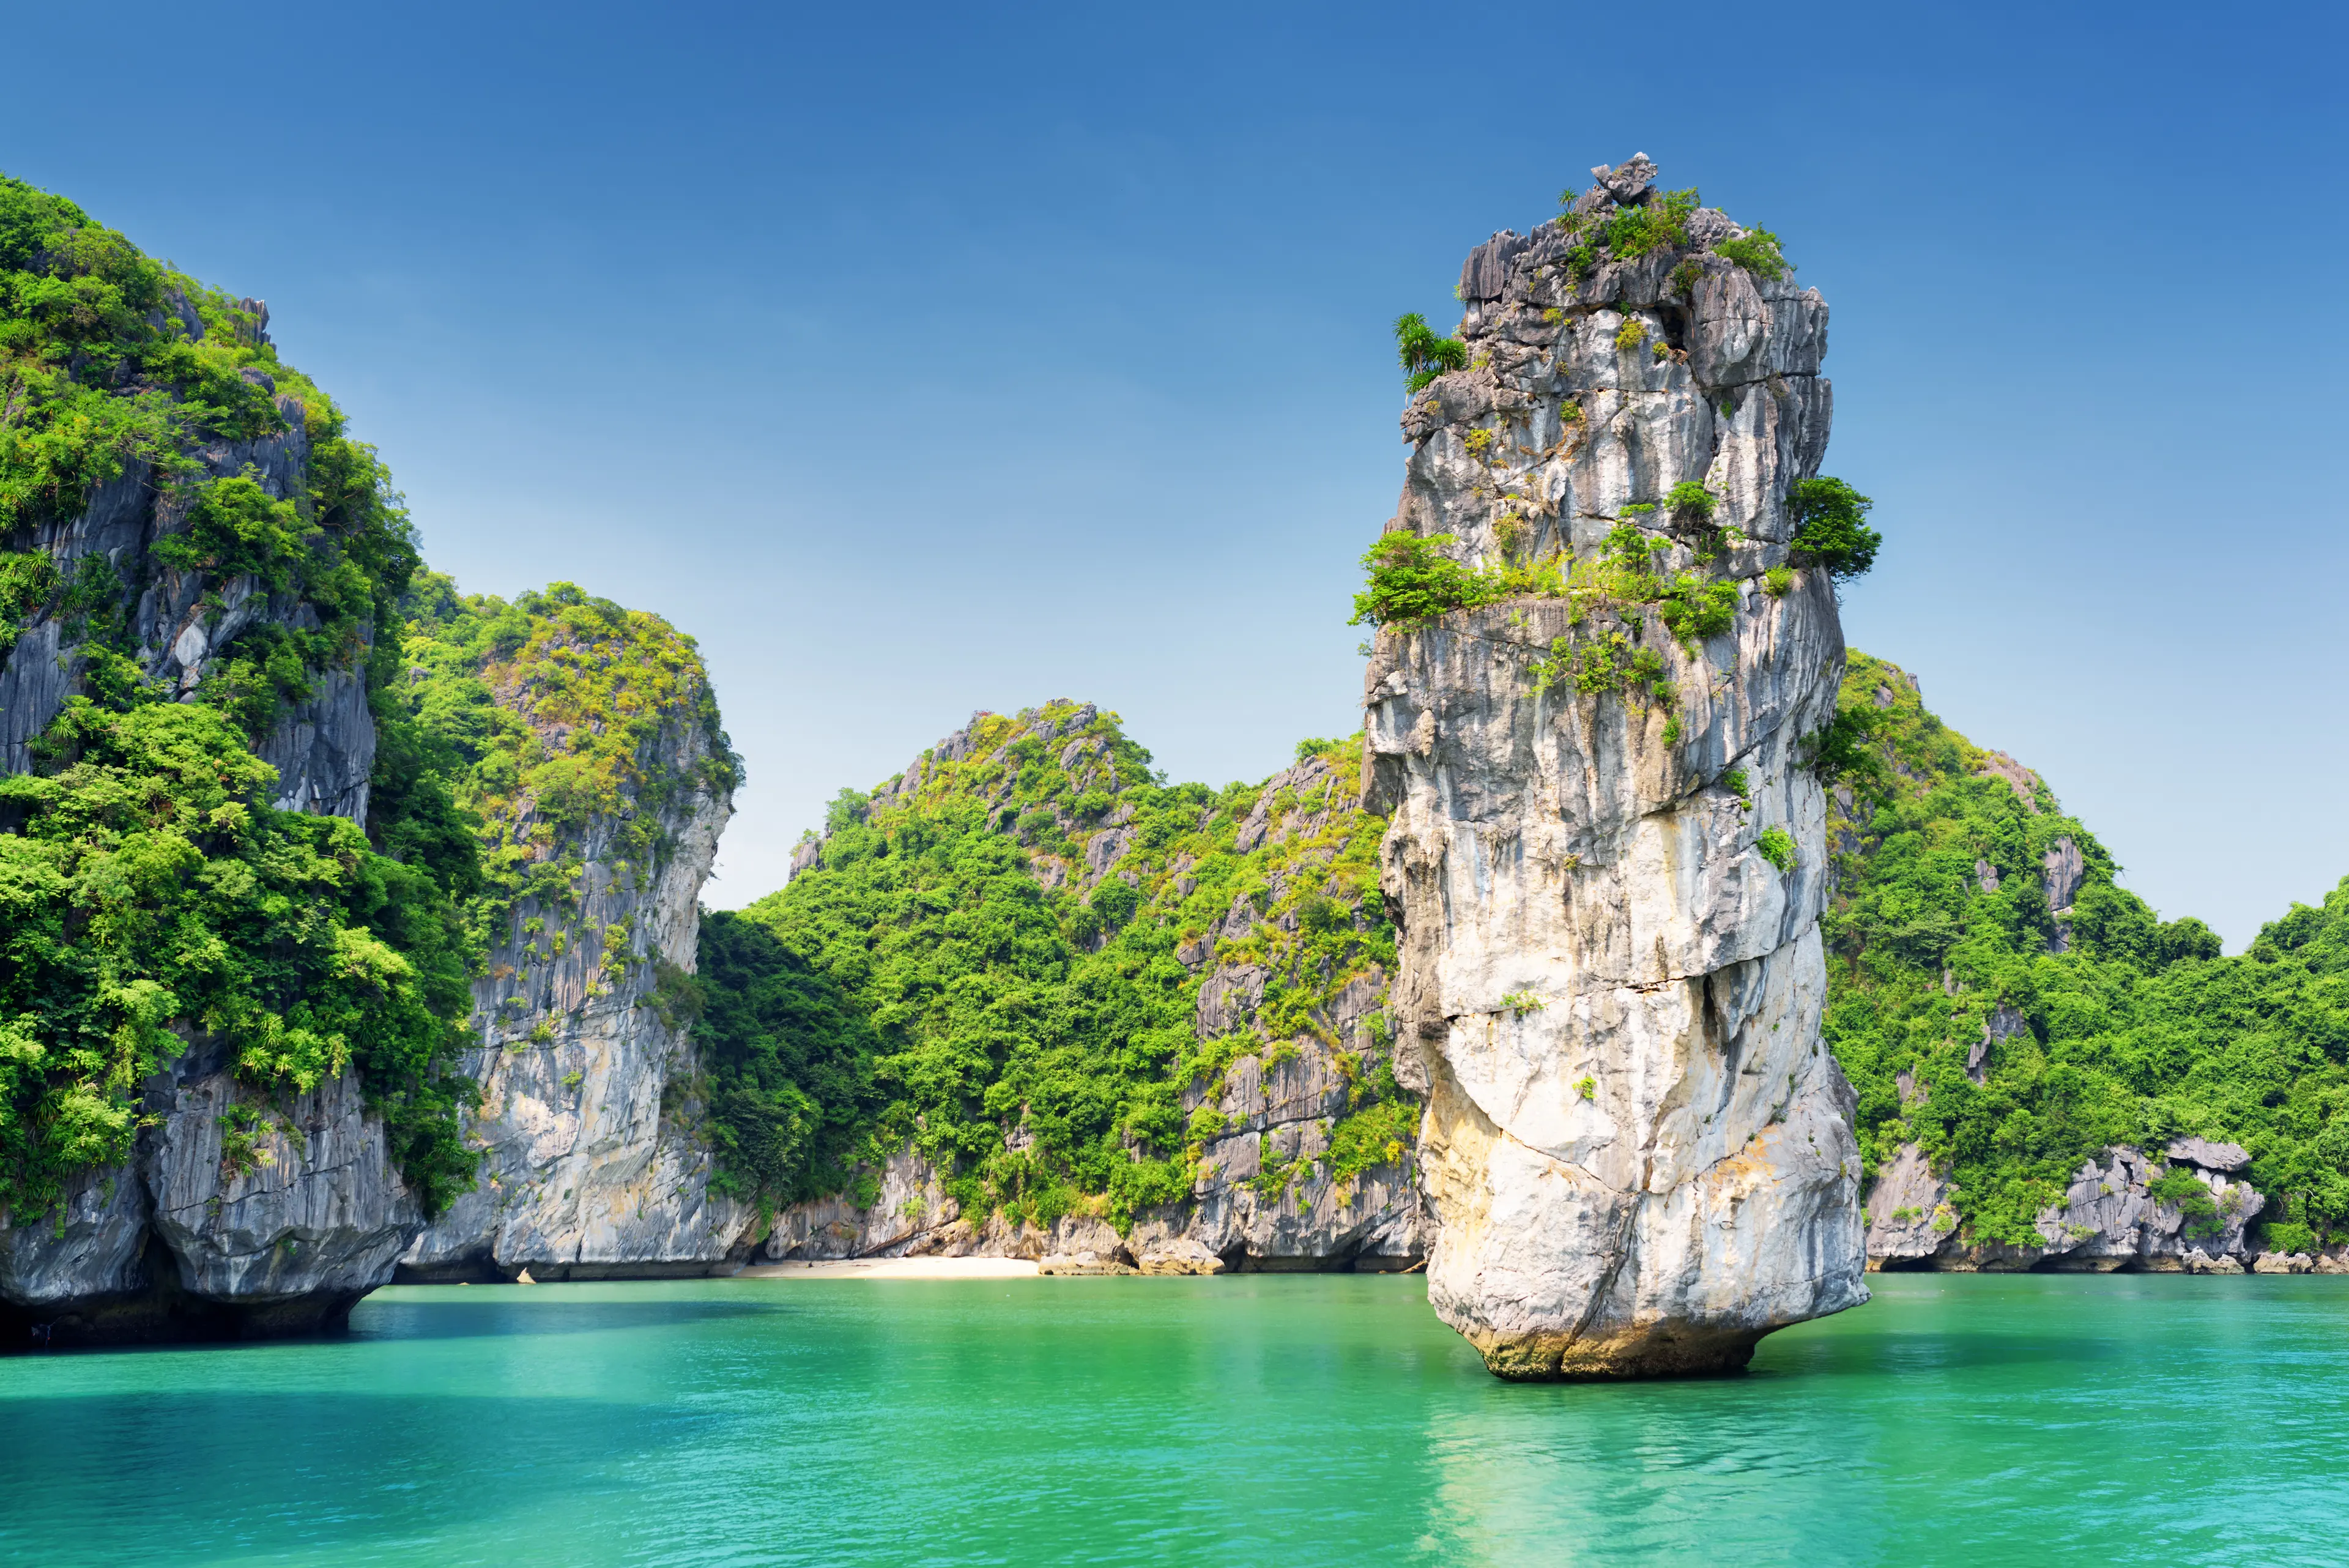 4-Day Romantic Food, Wine & Sightseeing Tour in Ha Long Bay